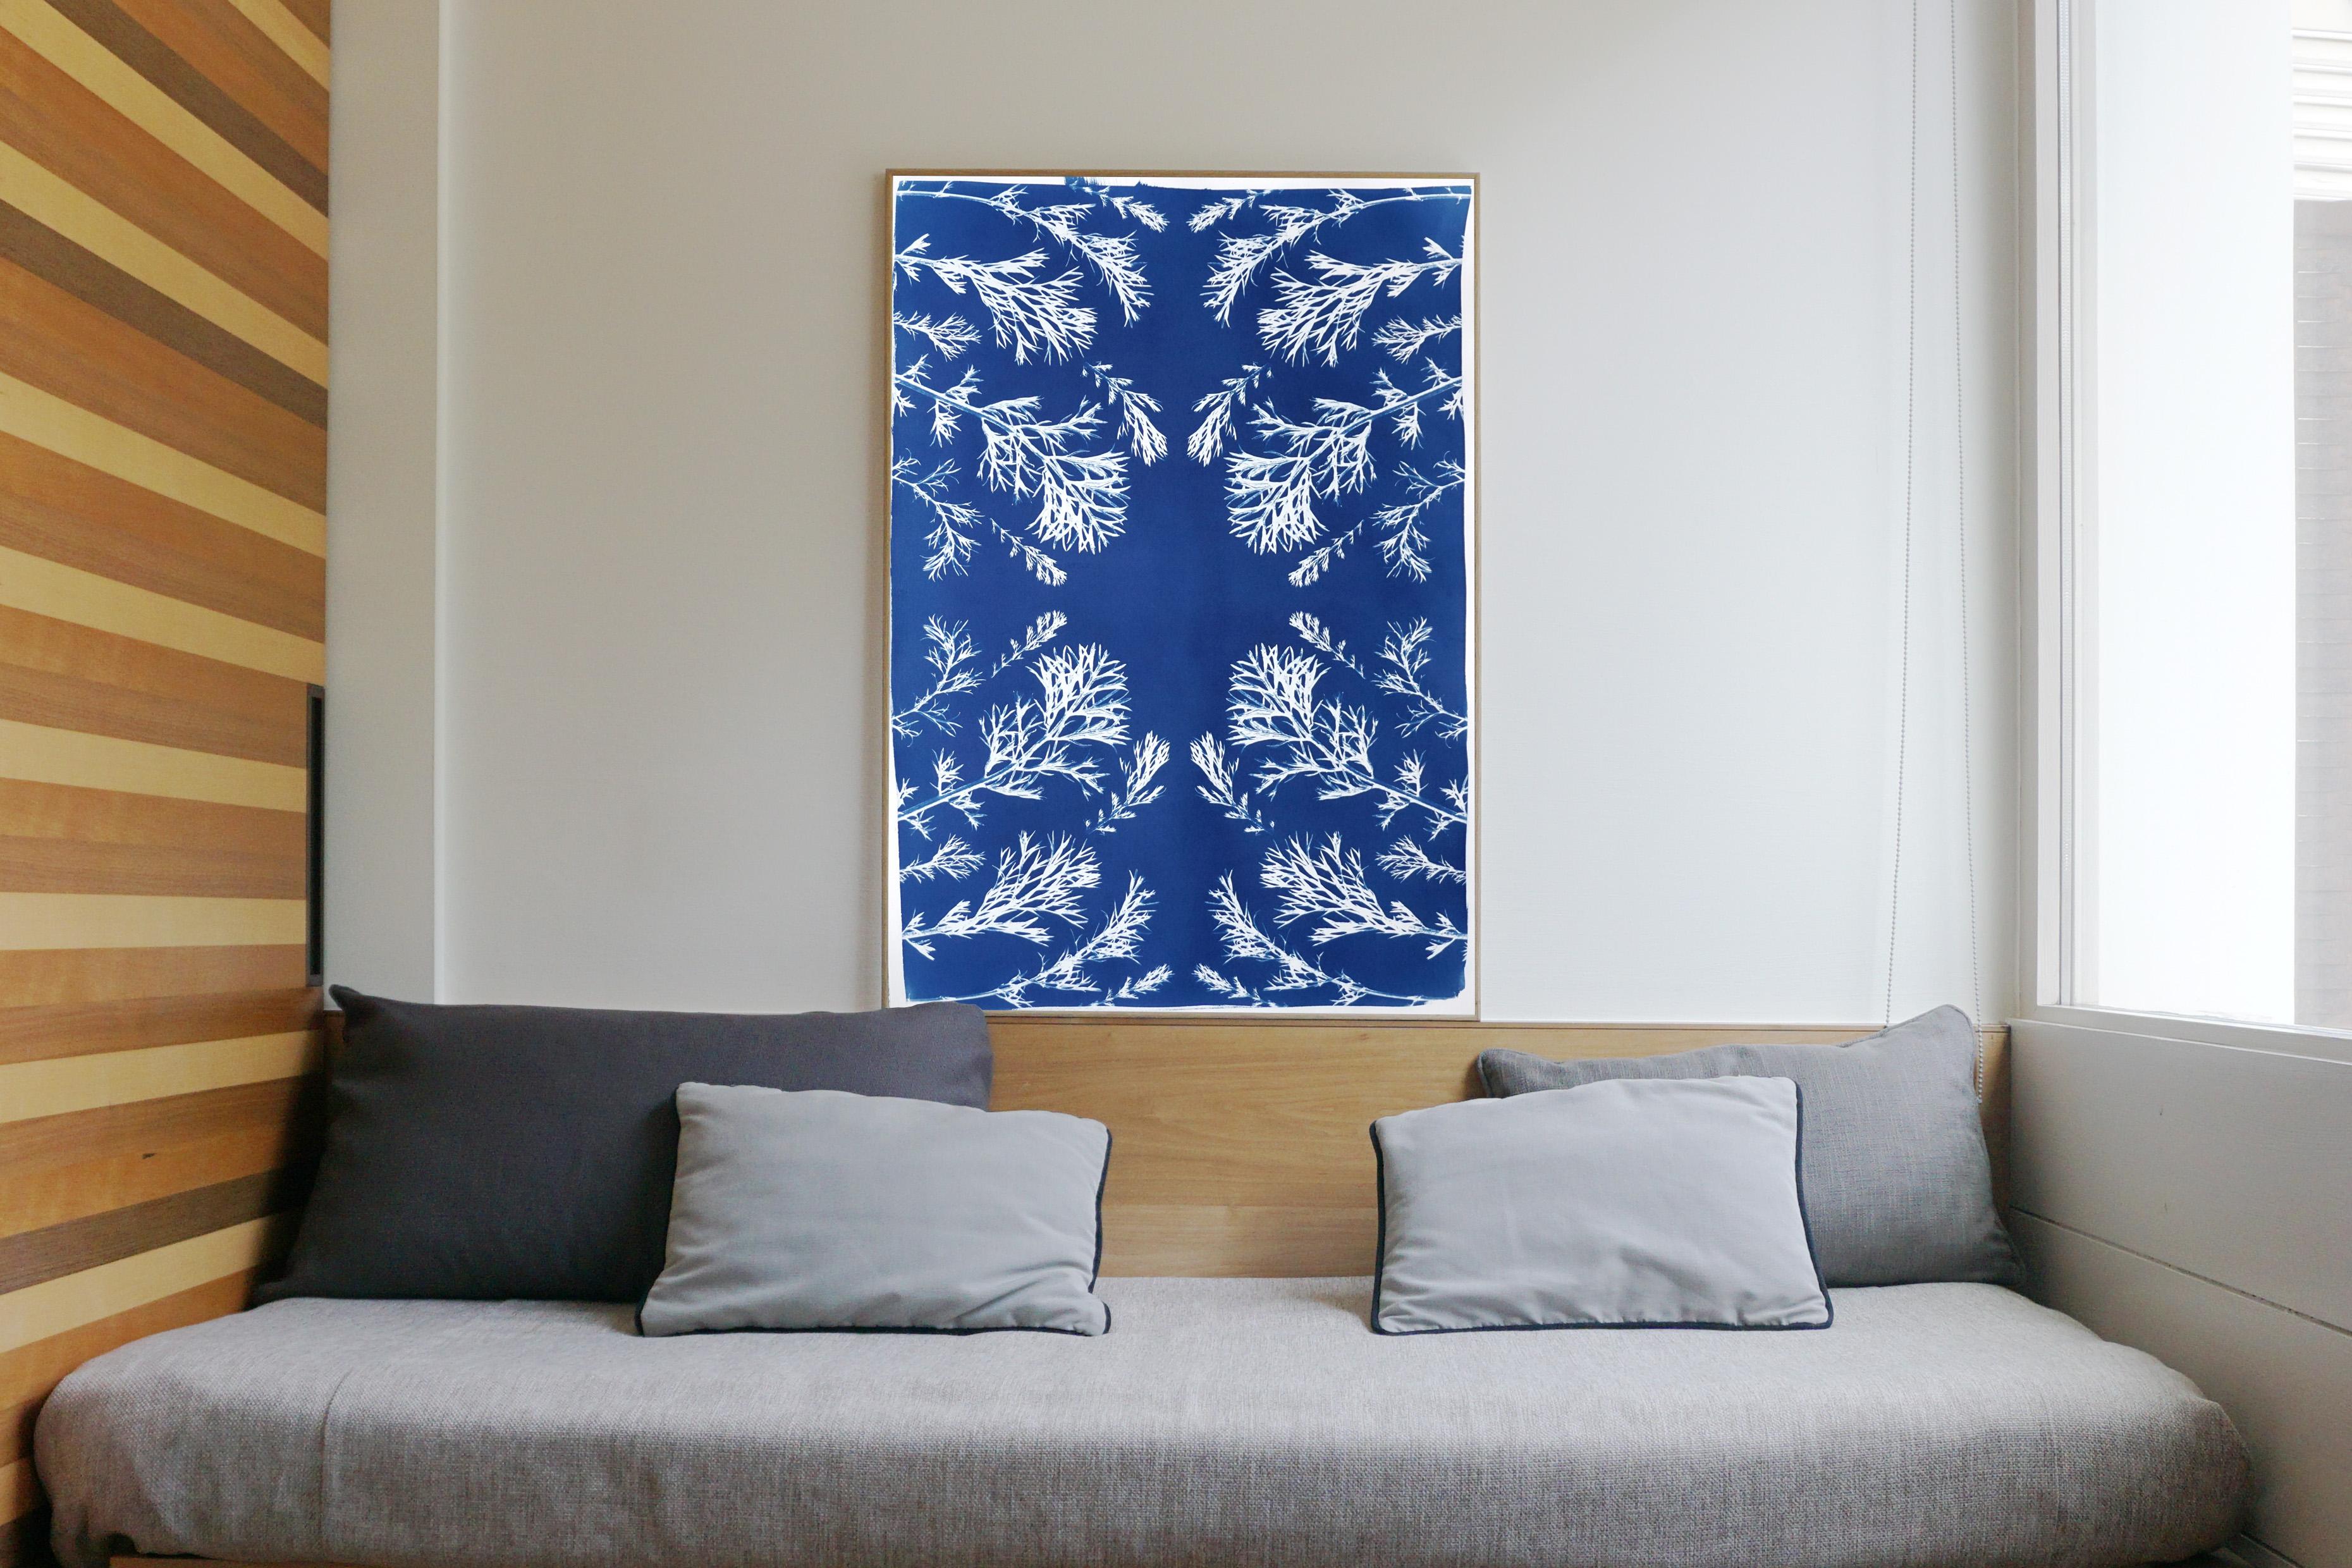 This is an exclusive handprinted limited edition cyanotype.

Details:
+ Title: Vintage Pressed Flowers Nº4
+ Year: 2022
+ Edition Size: 20
+ Stamped and Certificate of Authenticity provided
+ Measurements : 70x100 cm (28x 40 in.), a standard frame